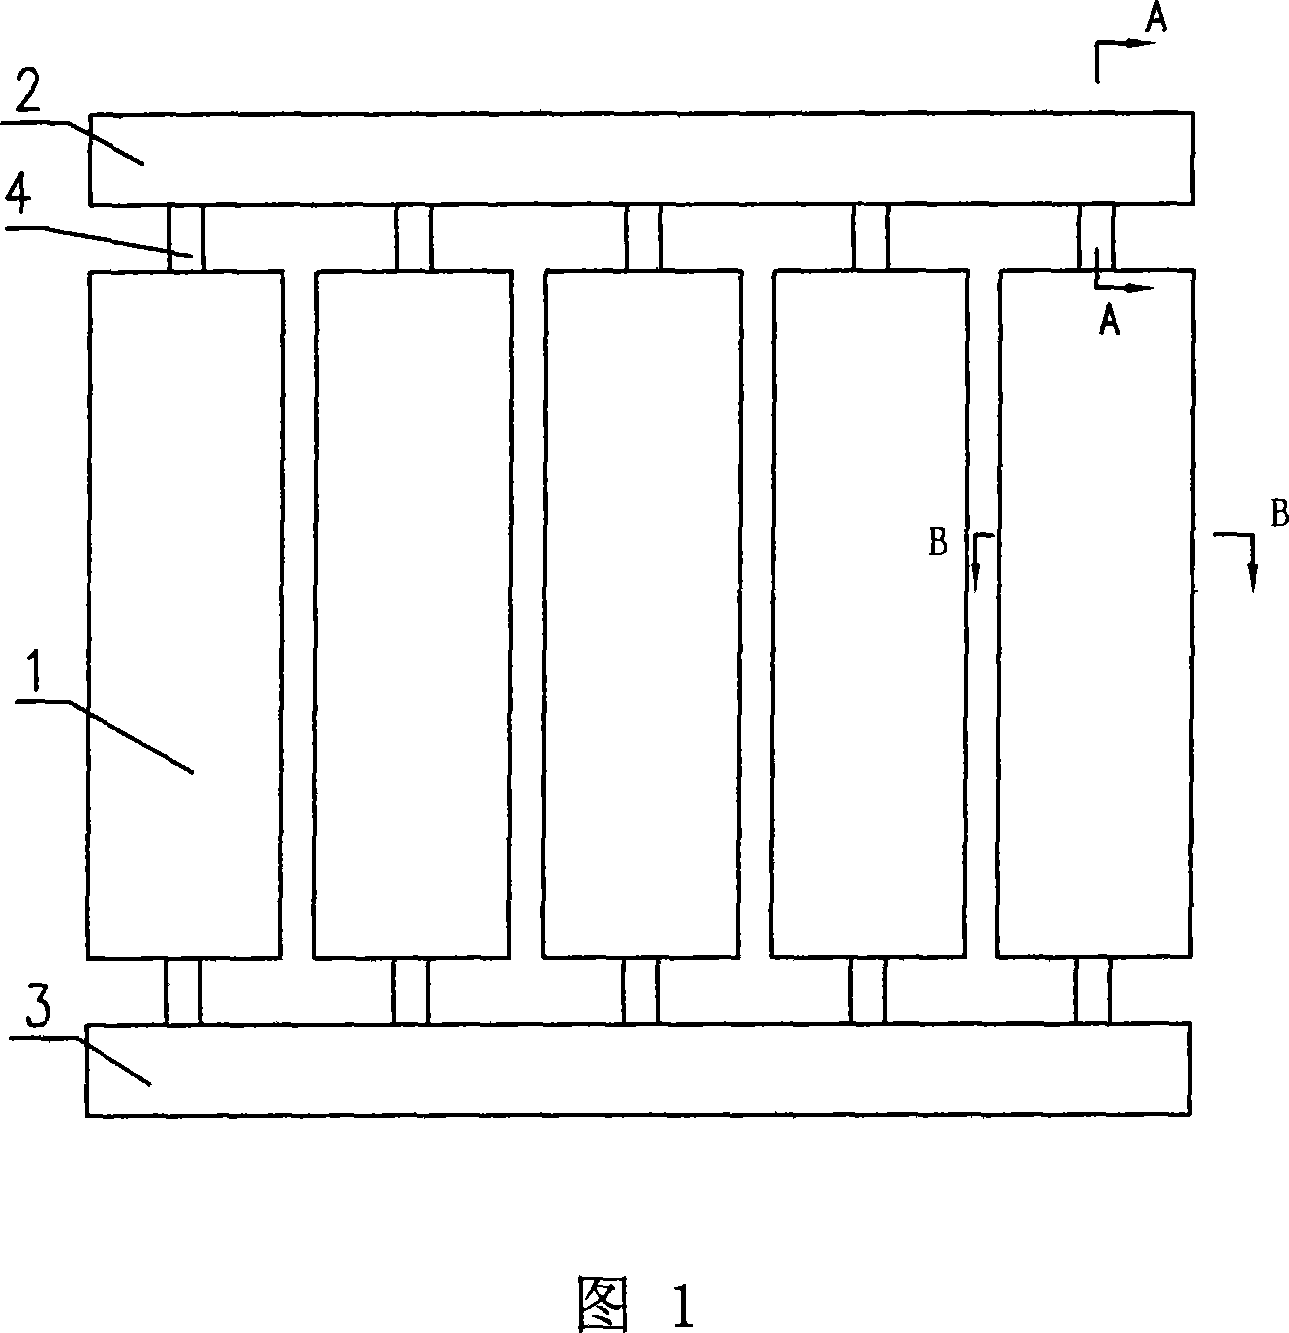 Improved finned heat sink with composite steel-aluminium pins